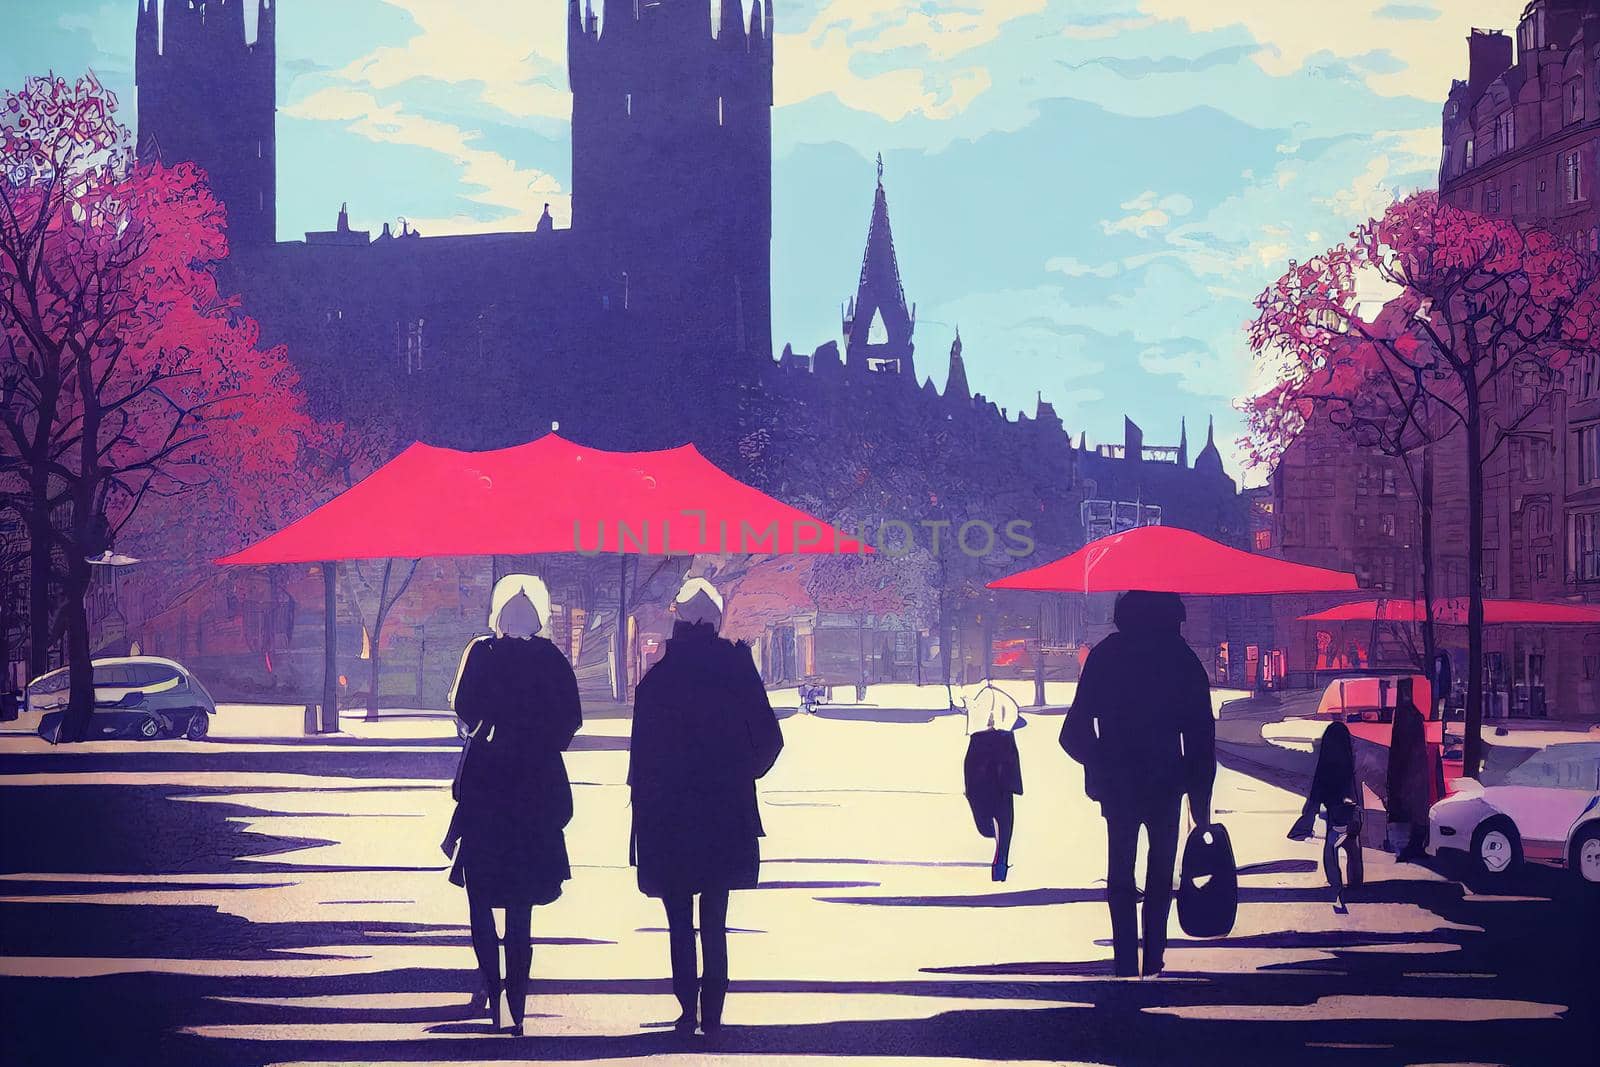 2d drawing Tourists walking around the capital city This is a famous landmark Edinurgh city centre scotland Uk th 2 , Anime style no watermark